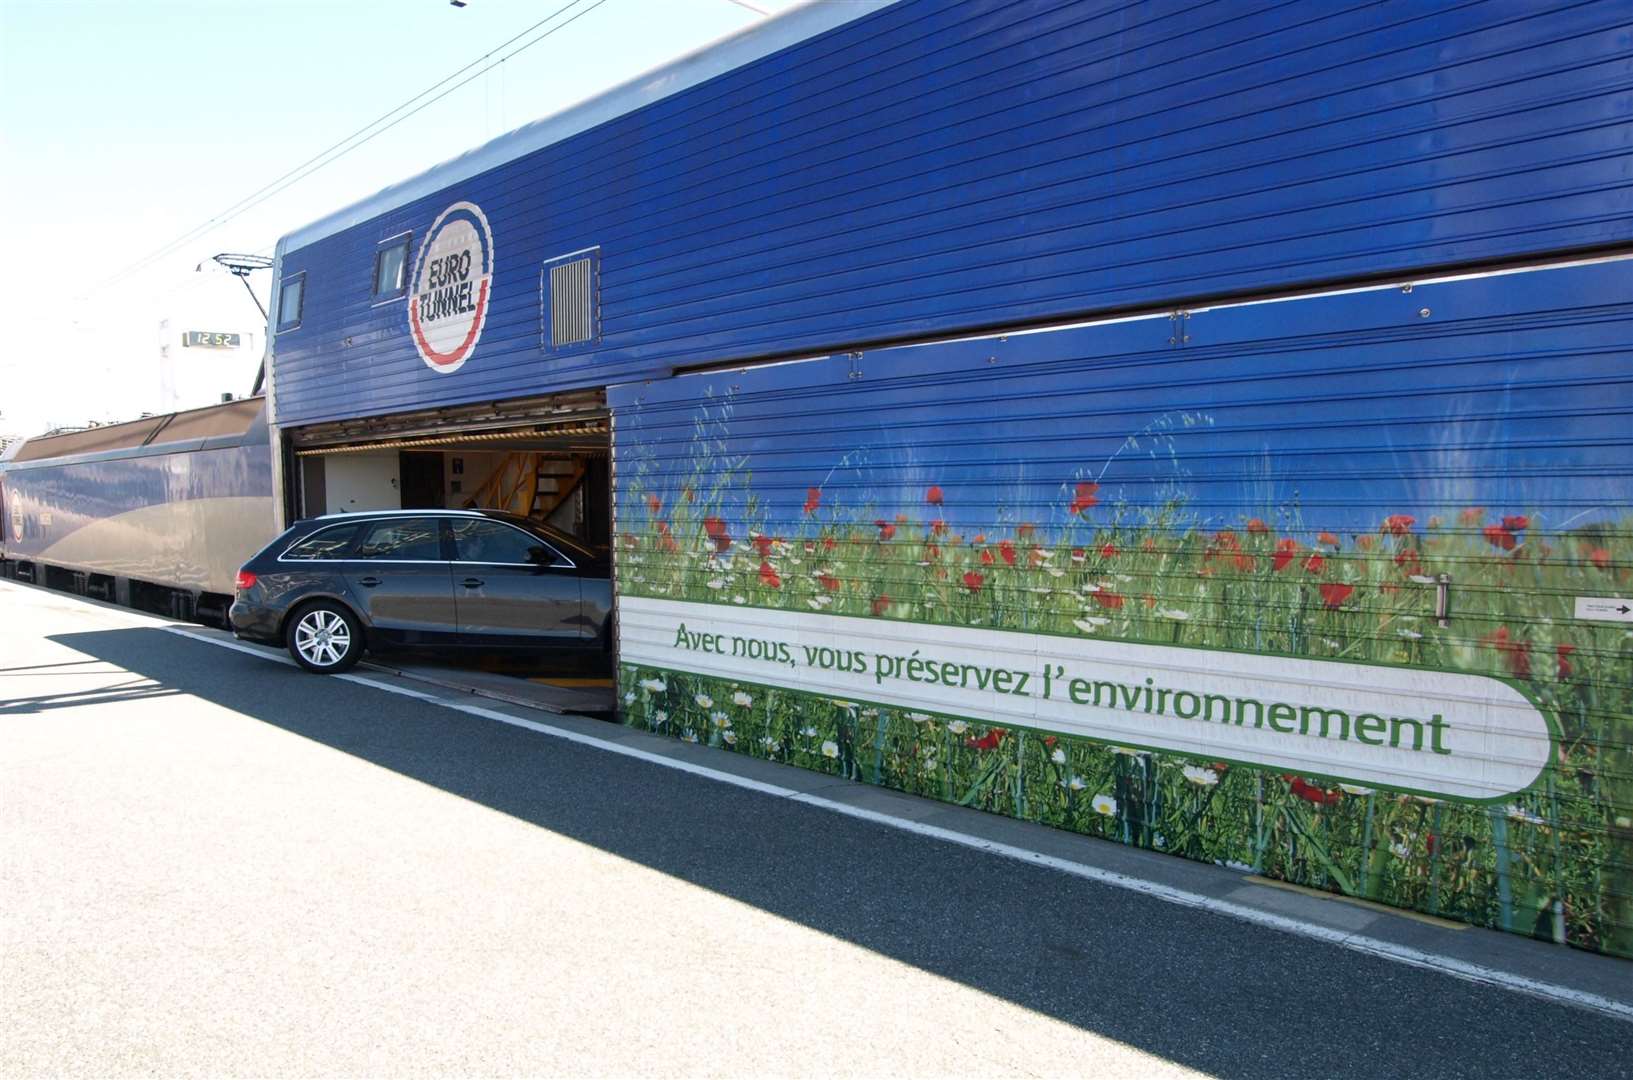 Eurotunnel is planning to slash its carbon emissions over the next four years